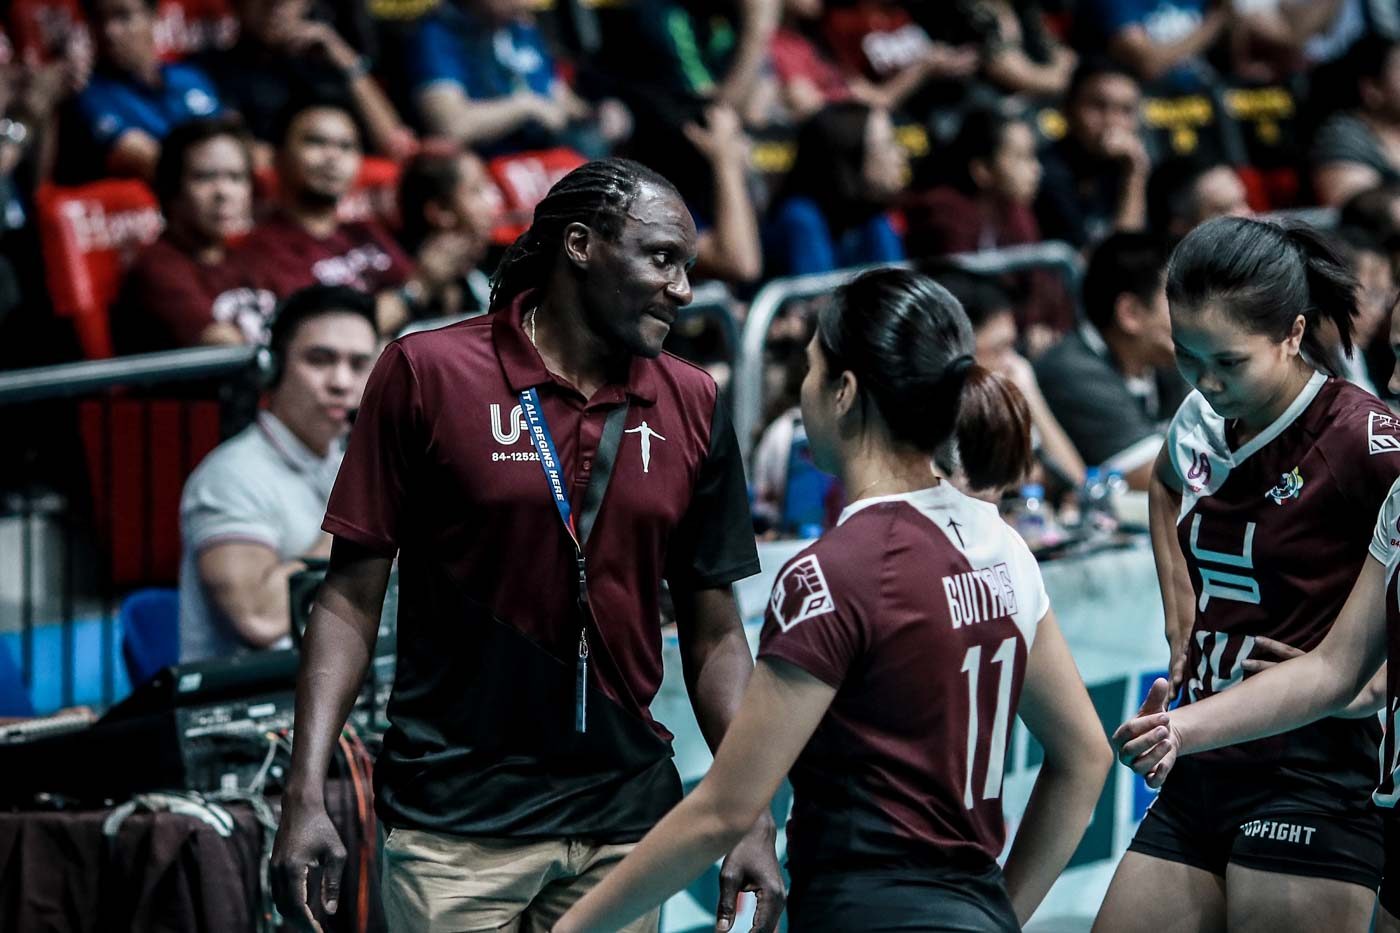 UP coach Okumu on painful loss: ‘Things did not happen as planned’